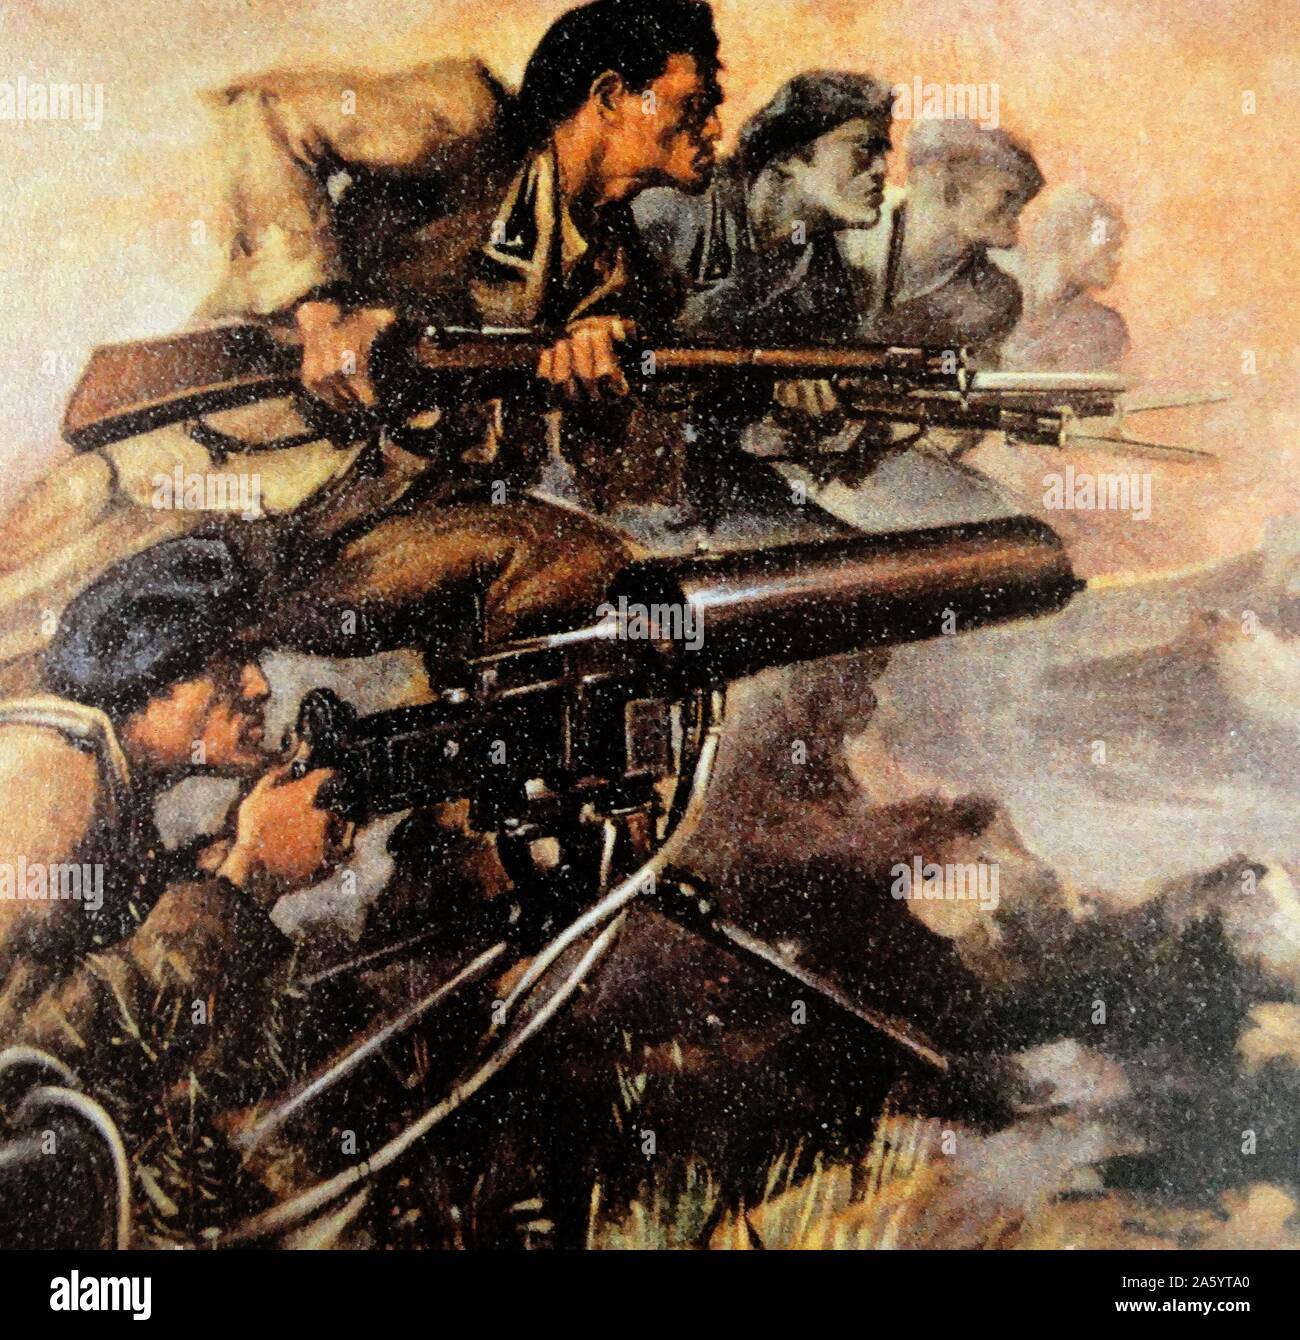 Battle of Guadalajara: Nationalist forces included the Italian Corps of Volunteer Troops (Corpo Truppe Volontarie, or CTV). The Battle of Guadalajara (March 8–23, 1937) saw the People's Republican Army (Ejército Popular Republicano, or EPR) defeat Italian and Nationalist forces attempting to encircle Madrid during the Spanish Civil War. Stock Photo